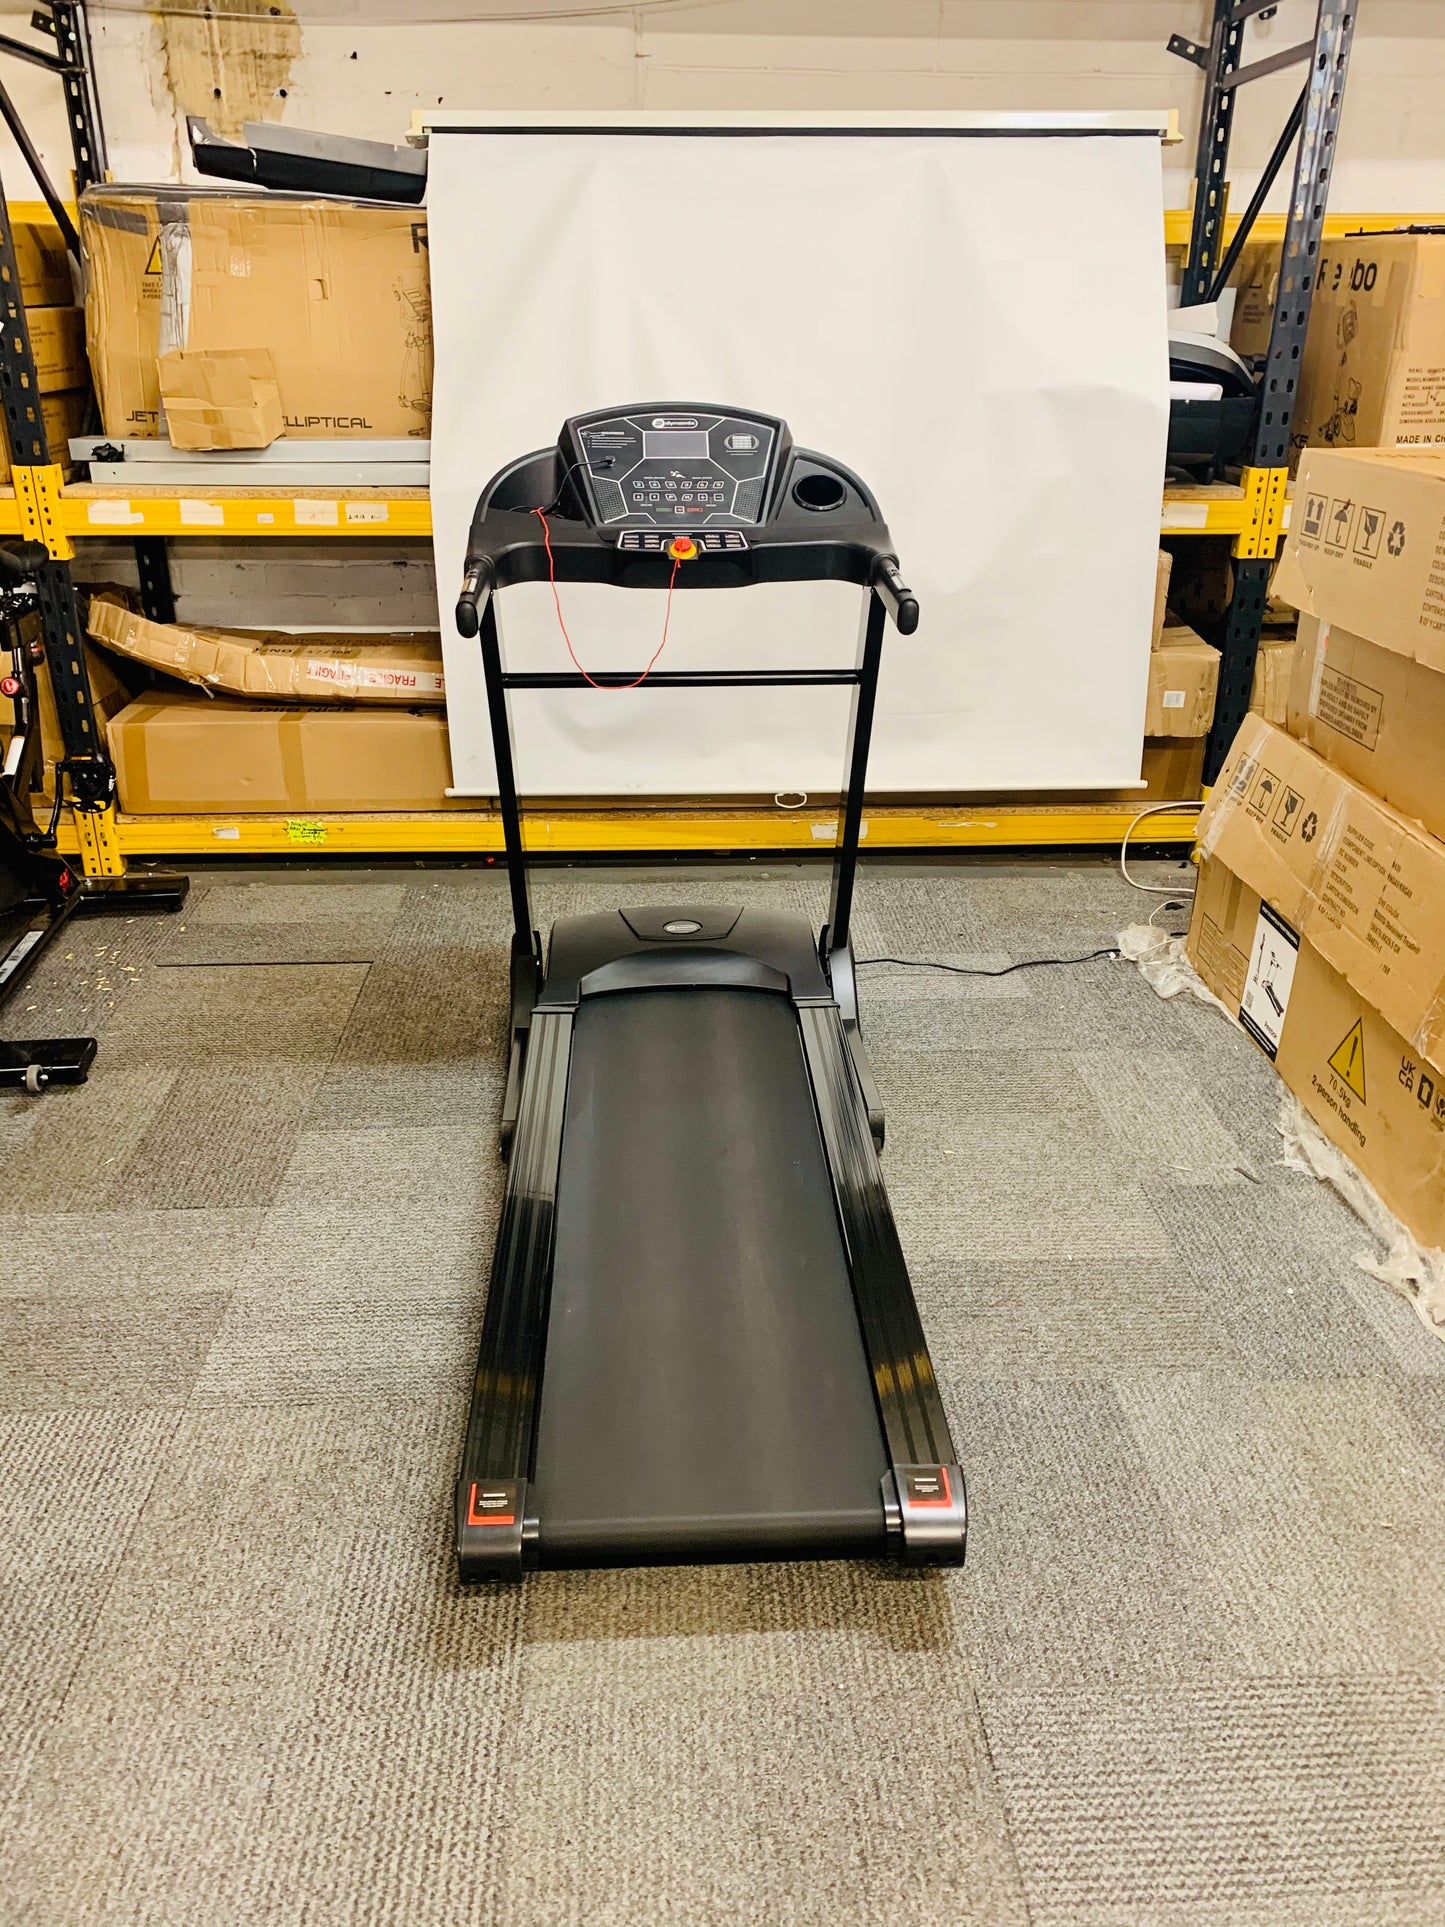 Dynamix T3000C Folding Electric Treadmill with Auto Incline